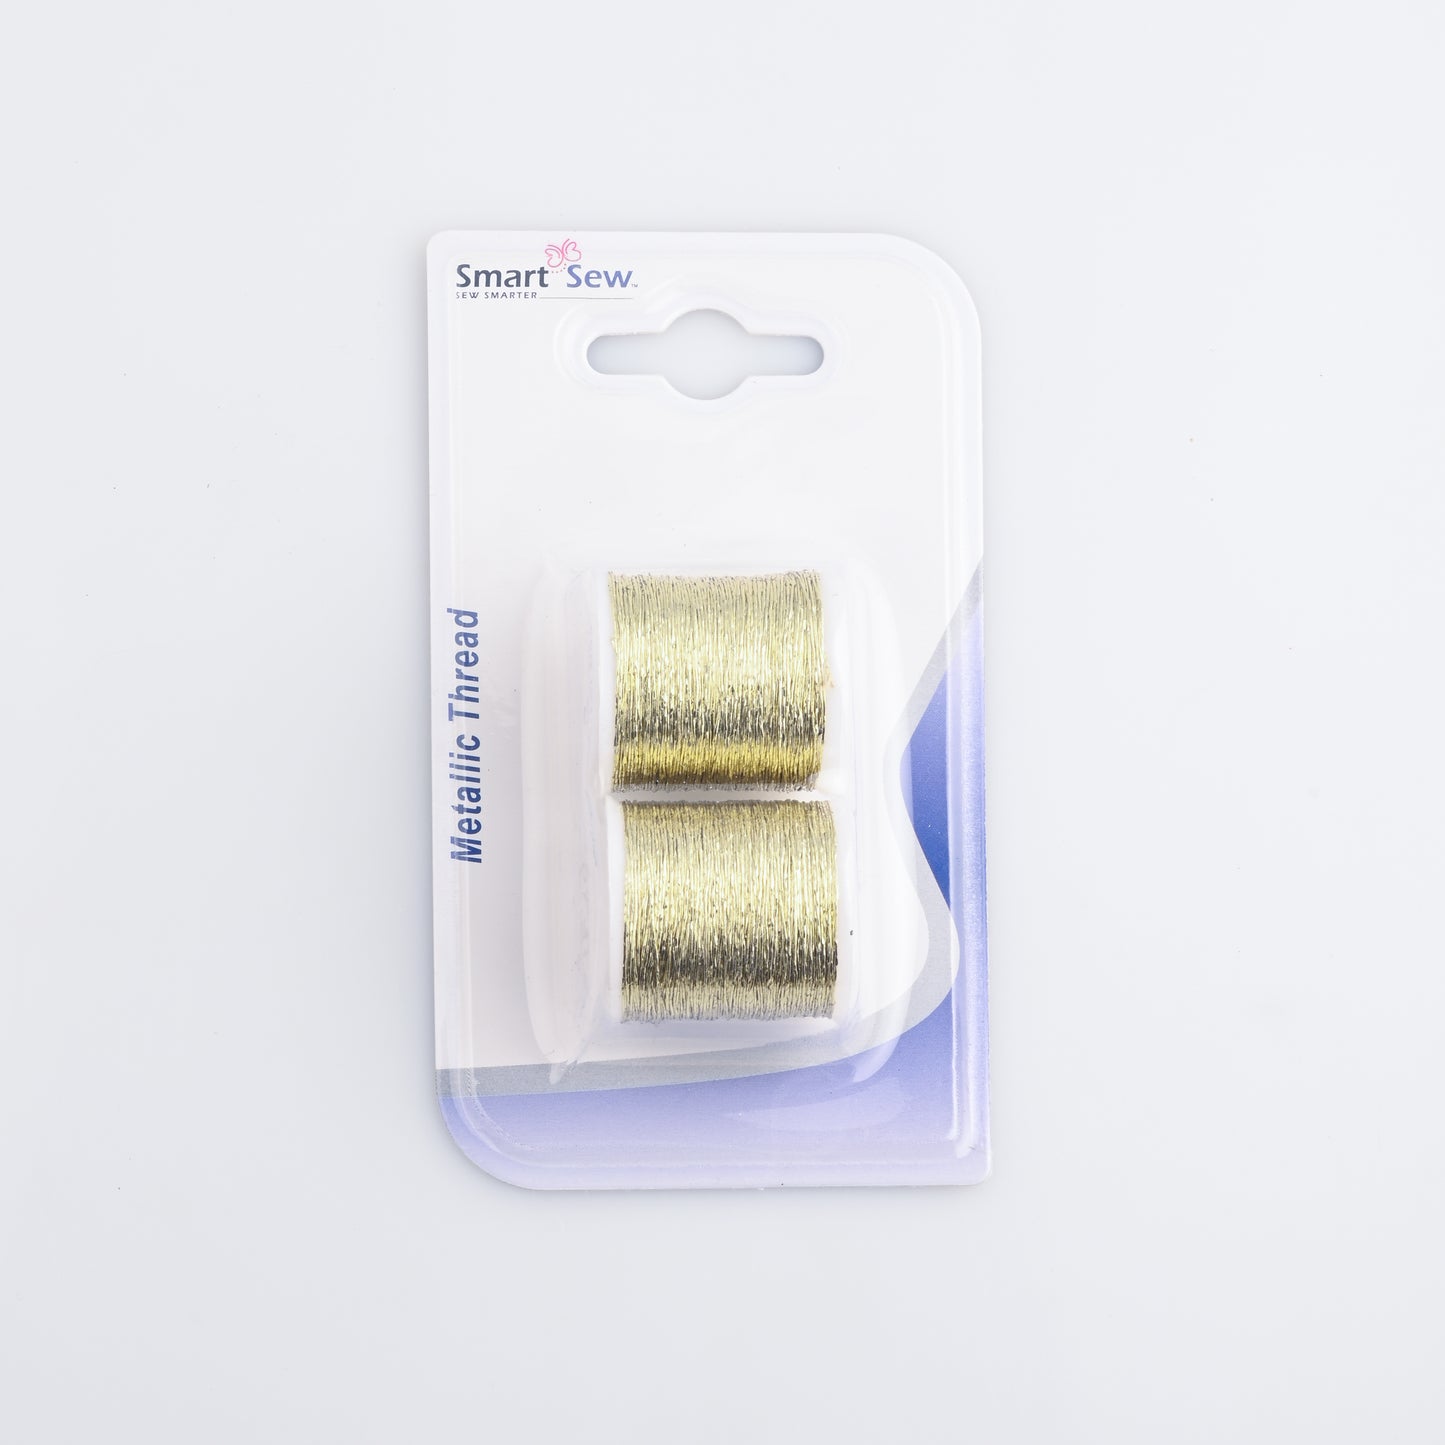 Metallic Thread - TO BE DISCONTINUED